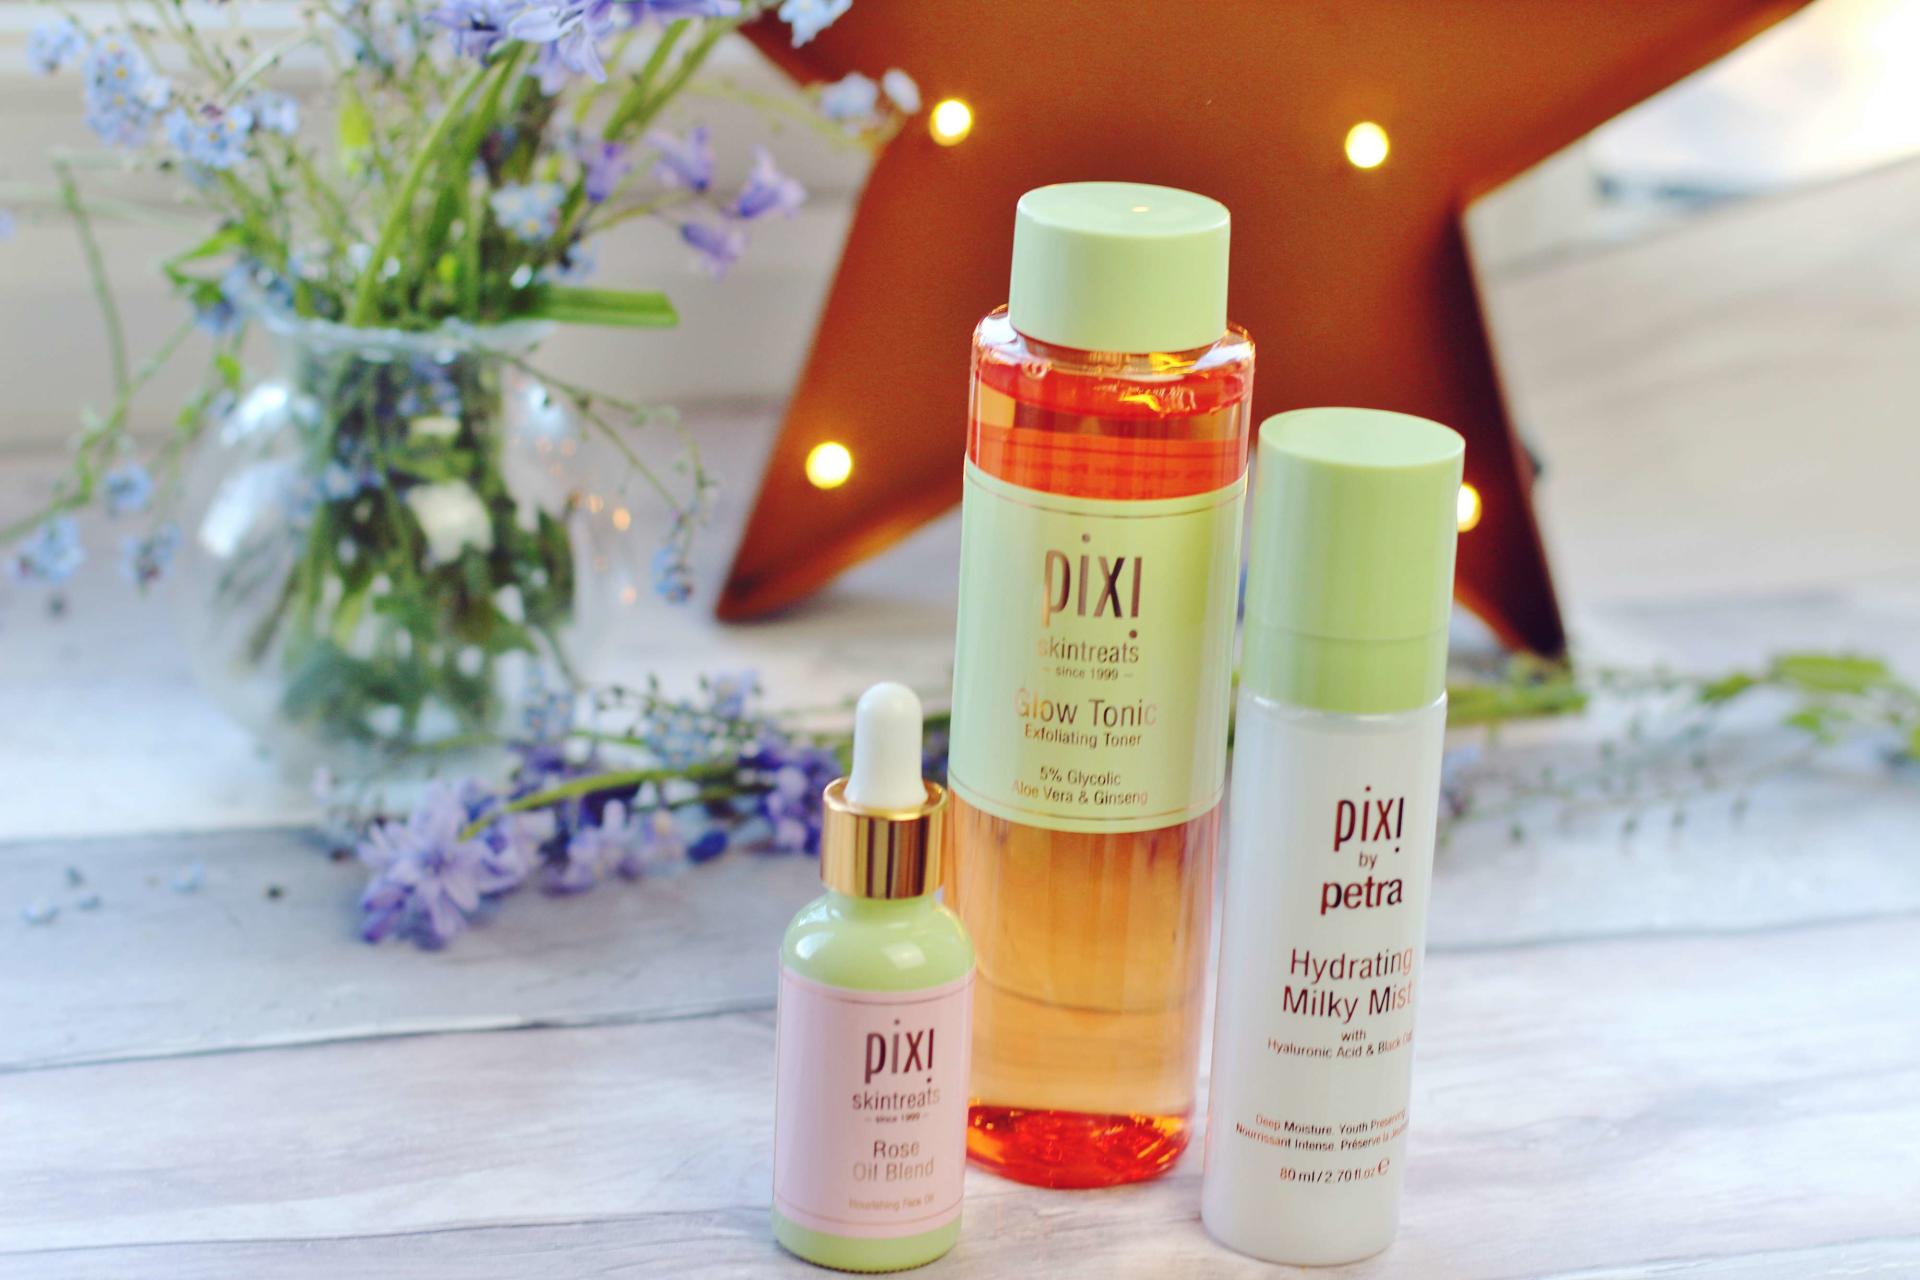 Pixi Skincare Routine and Collection